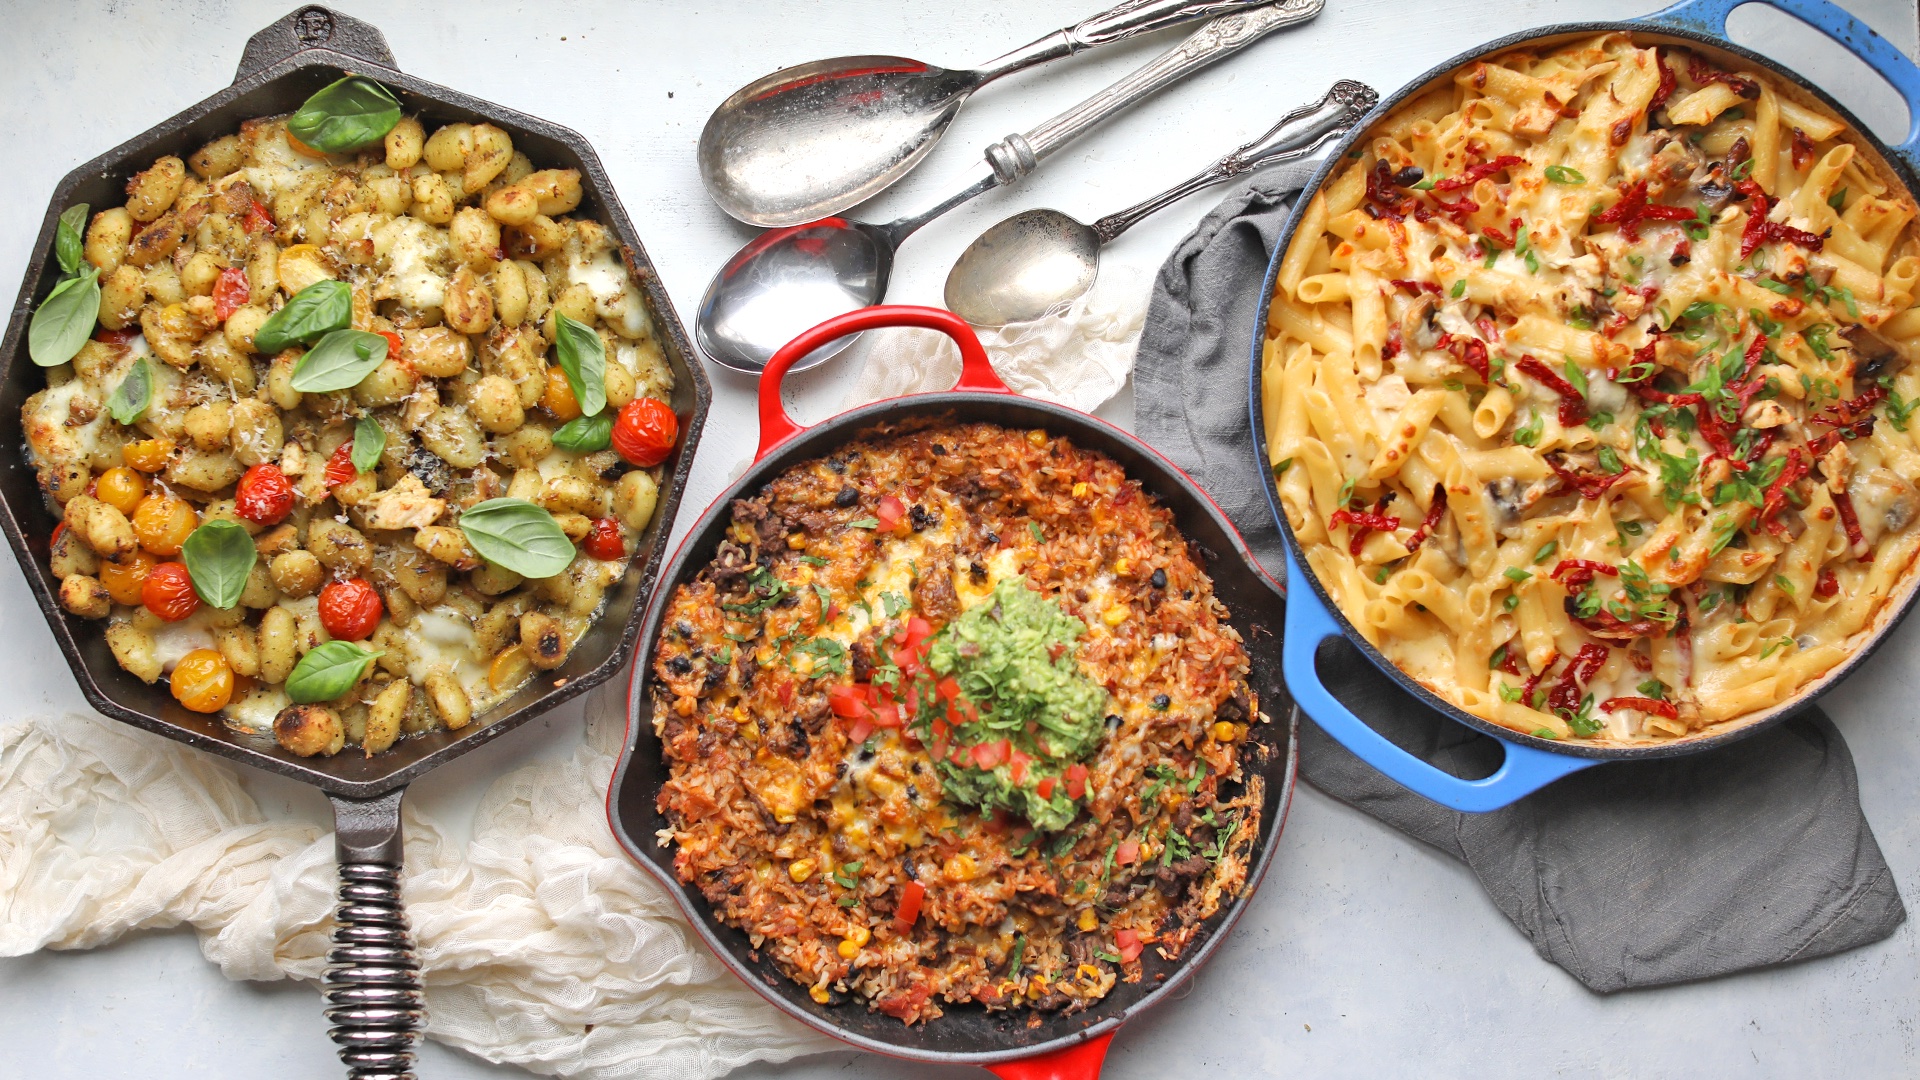 Three Easy One Pan Dinner Recipes for Busy Nights, Billy Parisi